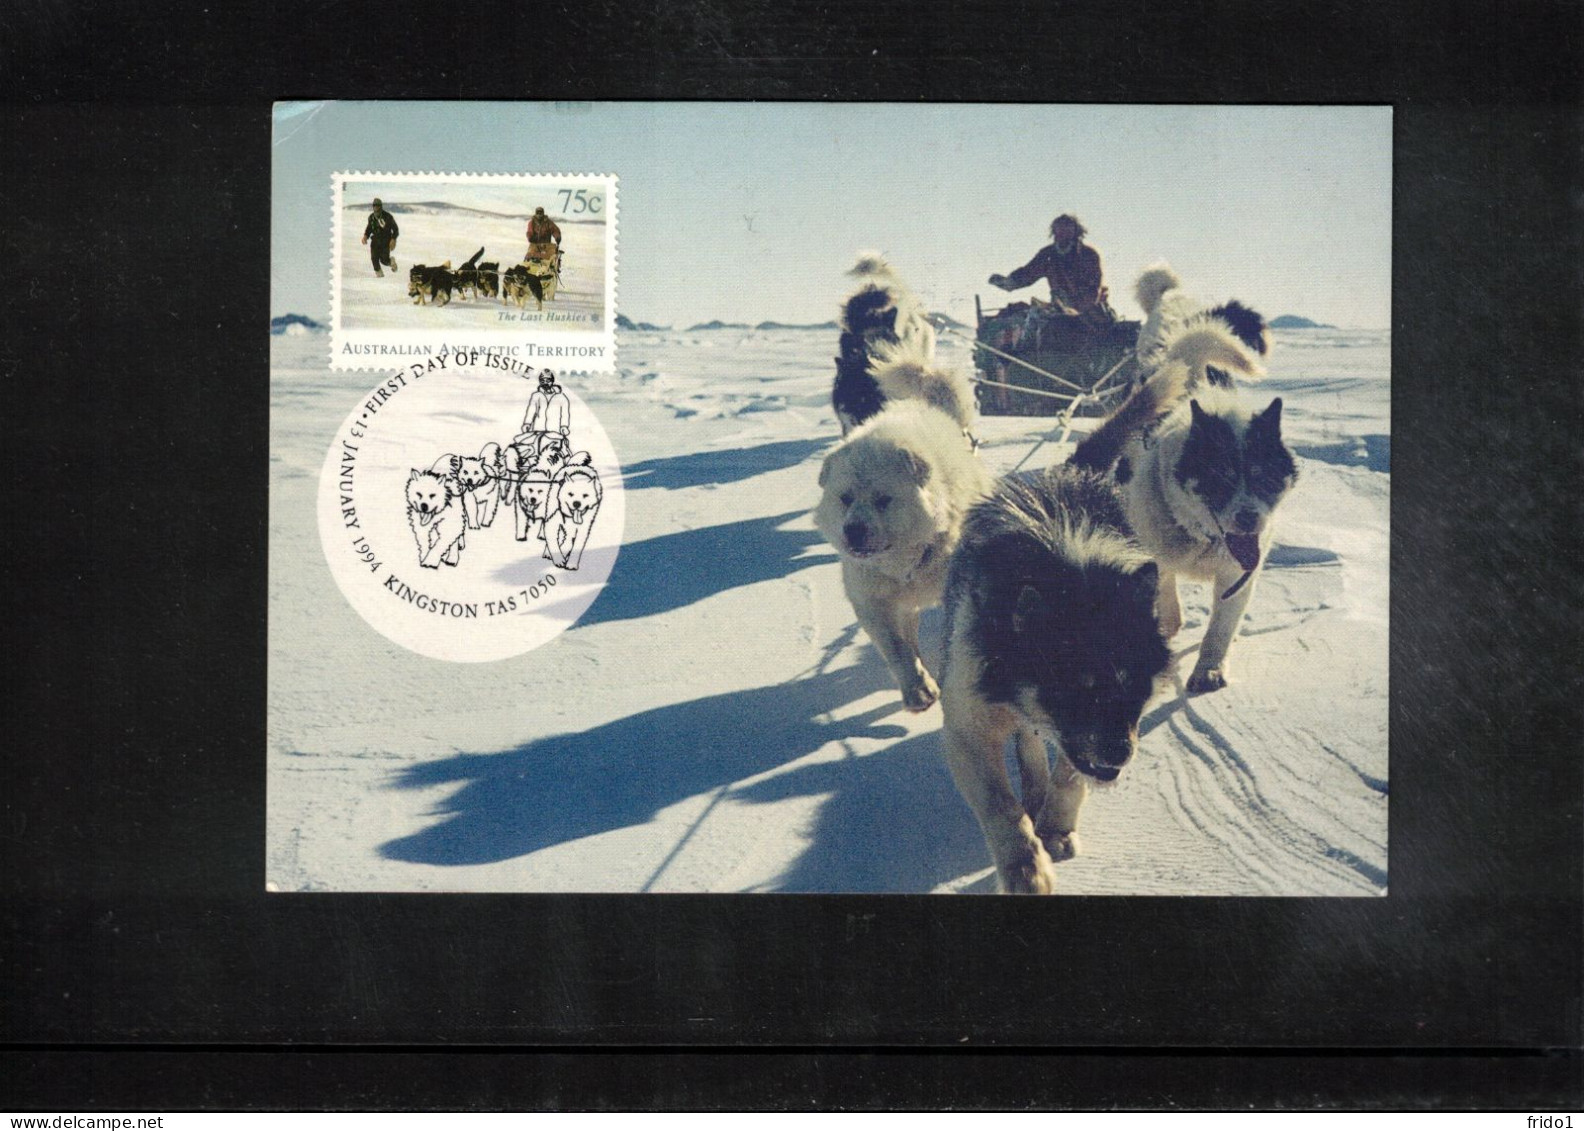 Australian Antarctic Territory 1994 Antarctica - Base Casey - Helicopter Mail From Ice Edge - Huskies Interesting Cover - Bases Antarctiques